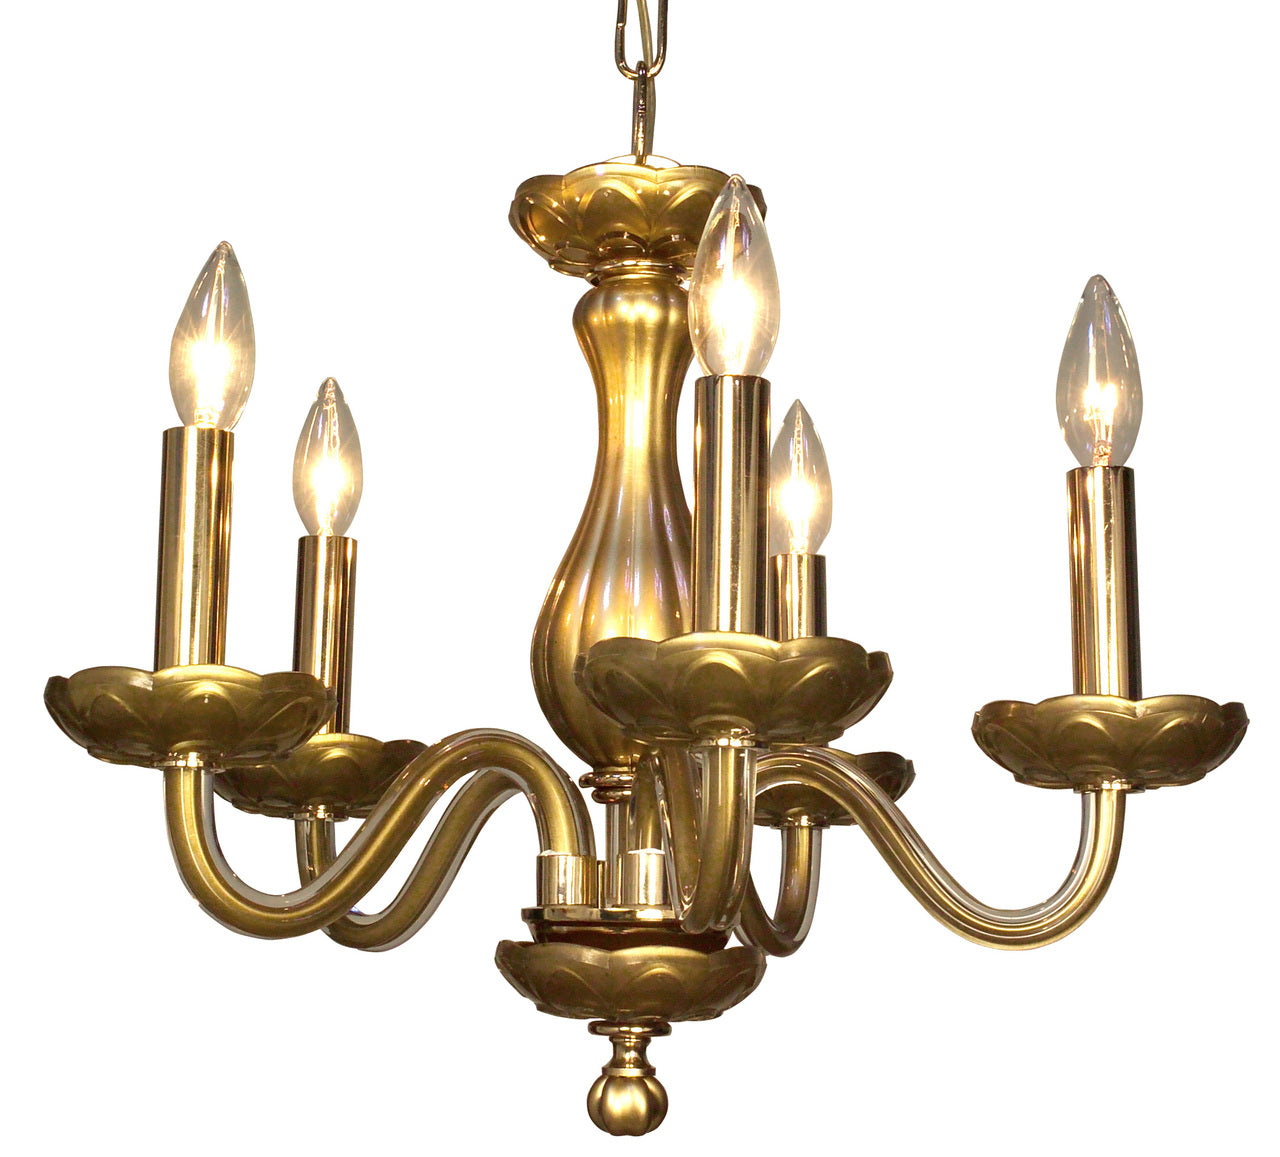 Classic Lighting 82045 GLD Monaco Crystal Chandelier in Gold (Imported from Spain)